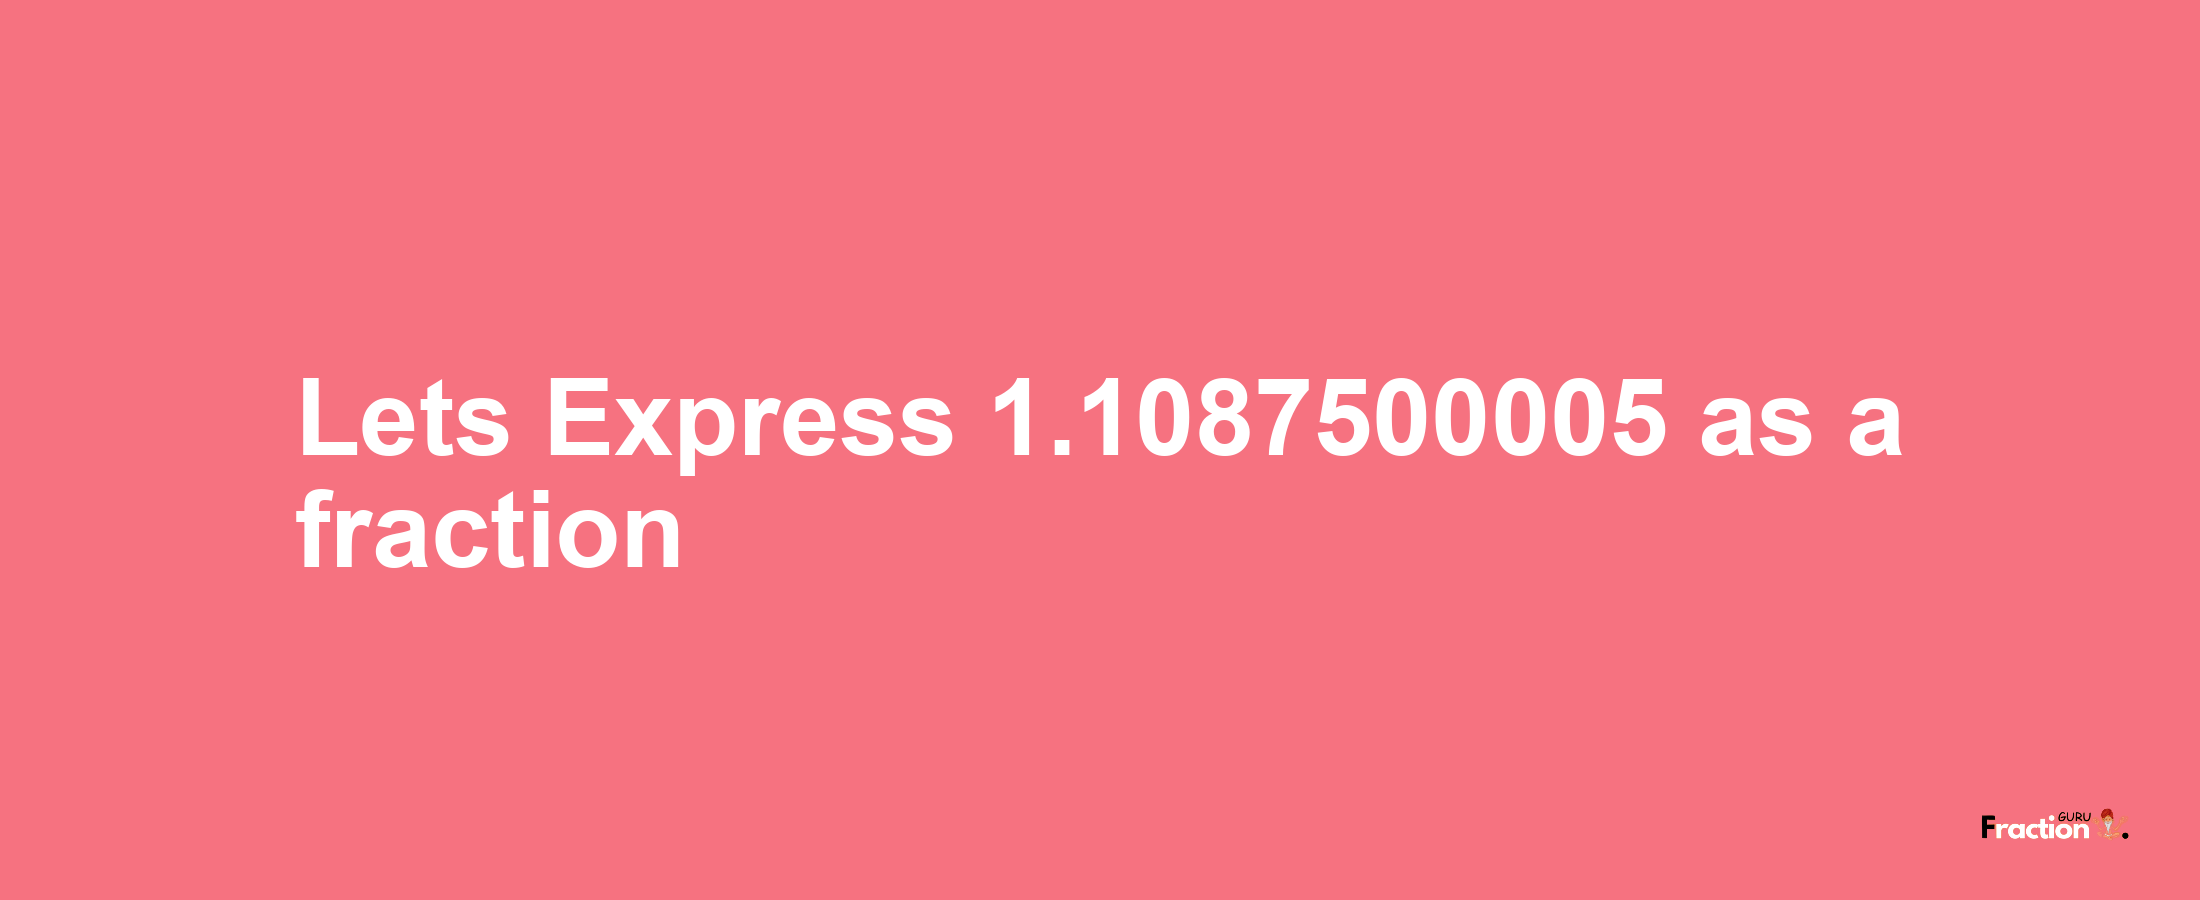 Lets Express 1.1087500005 as afraction